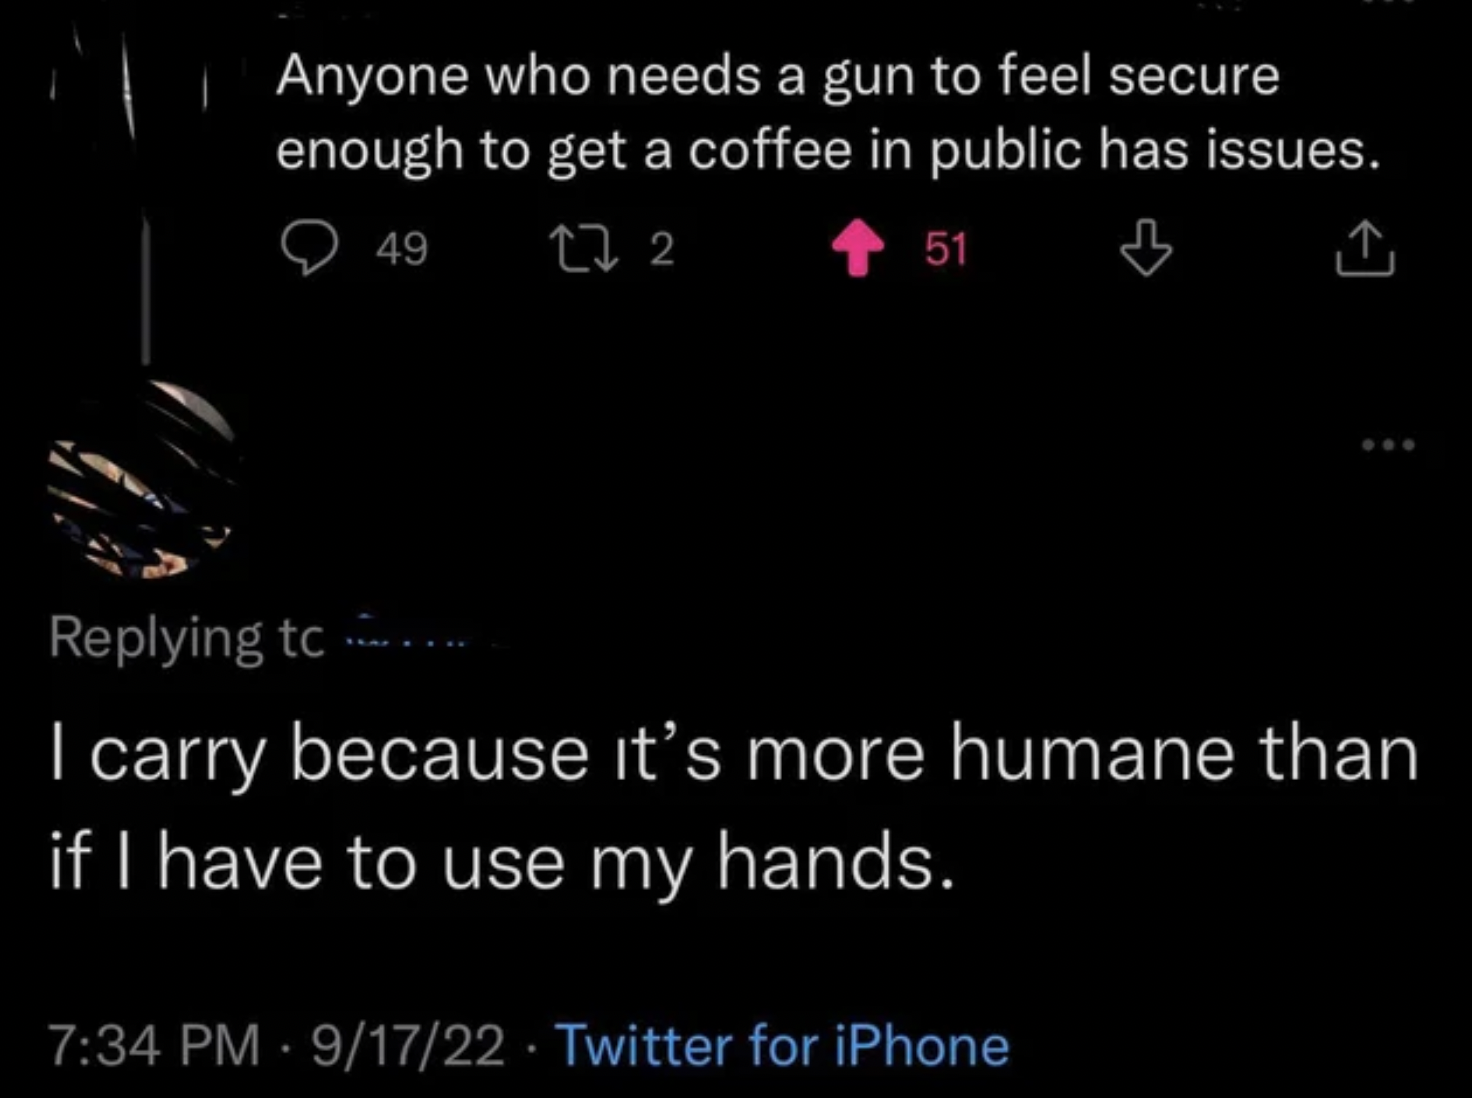 Internet tough guys - atmosphere - Anyone who needs a gun to feel secure enough to get a coffee in public has issues. 49 27 2 51 ing tc I carry because it's more humane than if I have to use my hands.